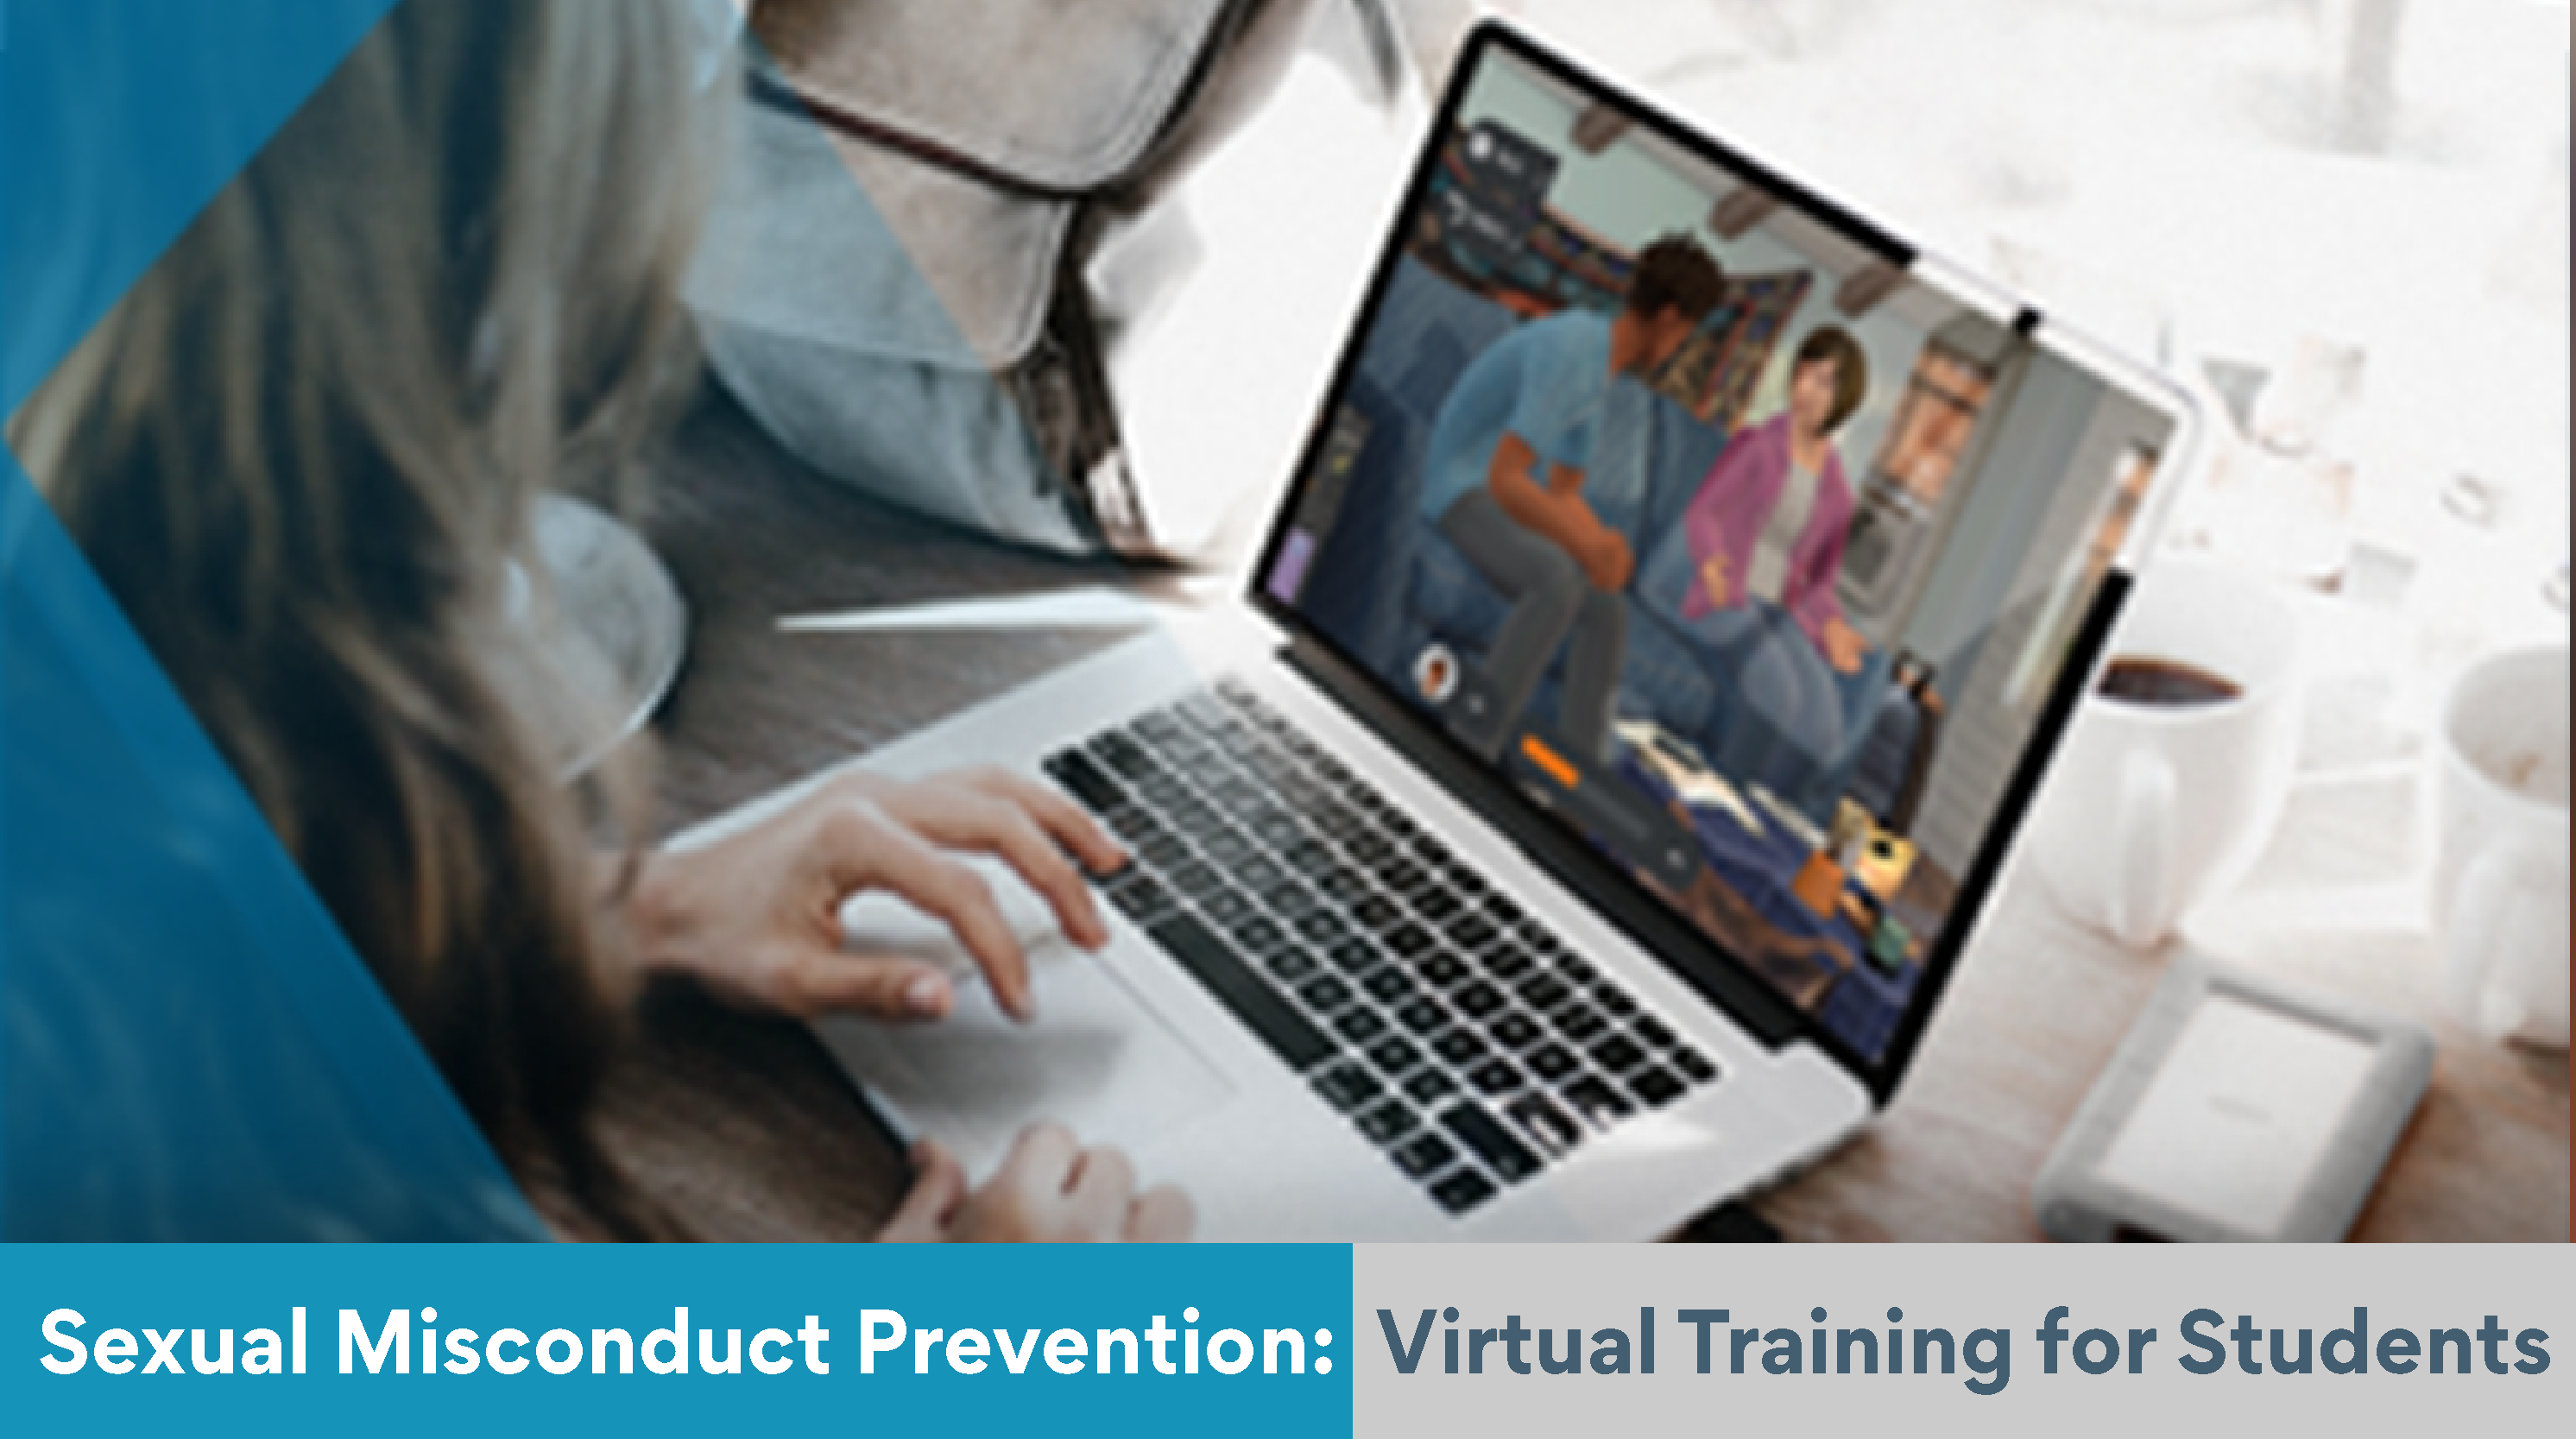 Sexual Misconduct Prevention: Virtual Training for Students [hosted by Inside Higher Ed]